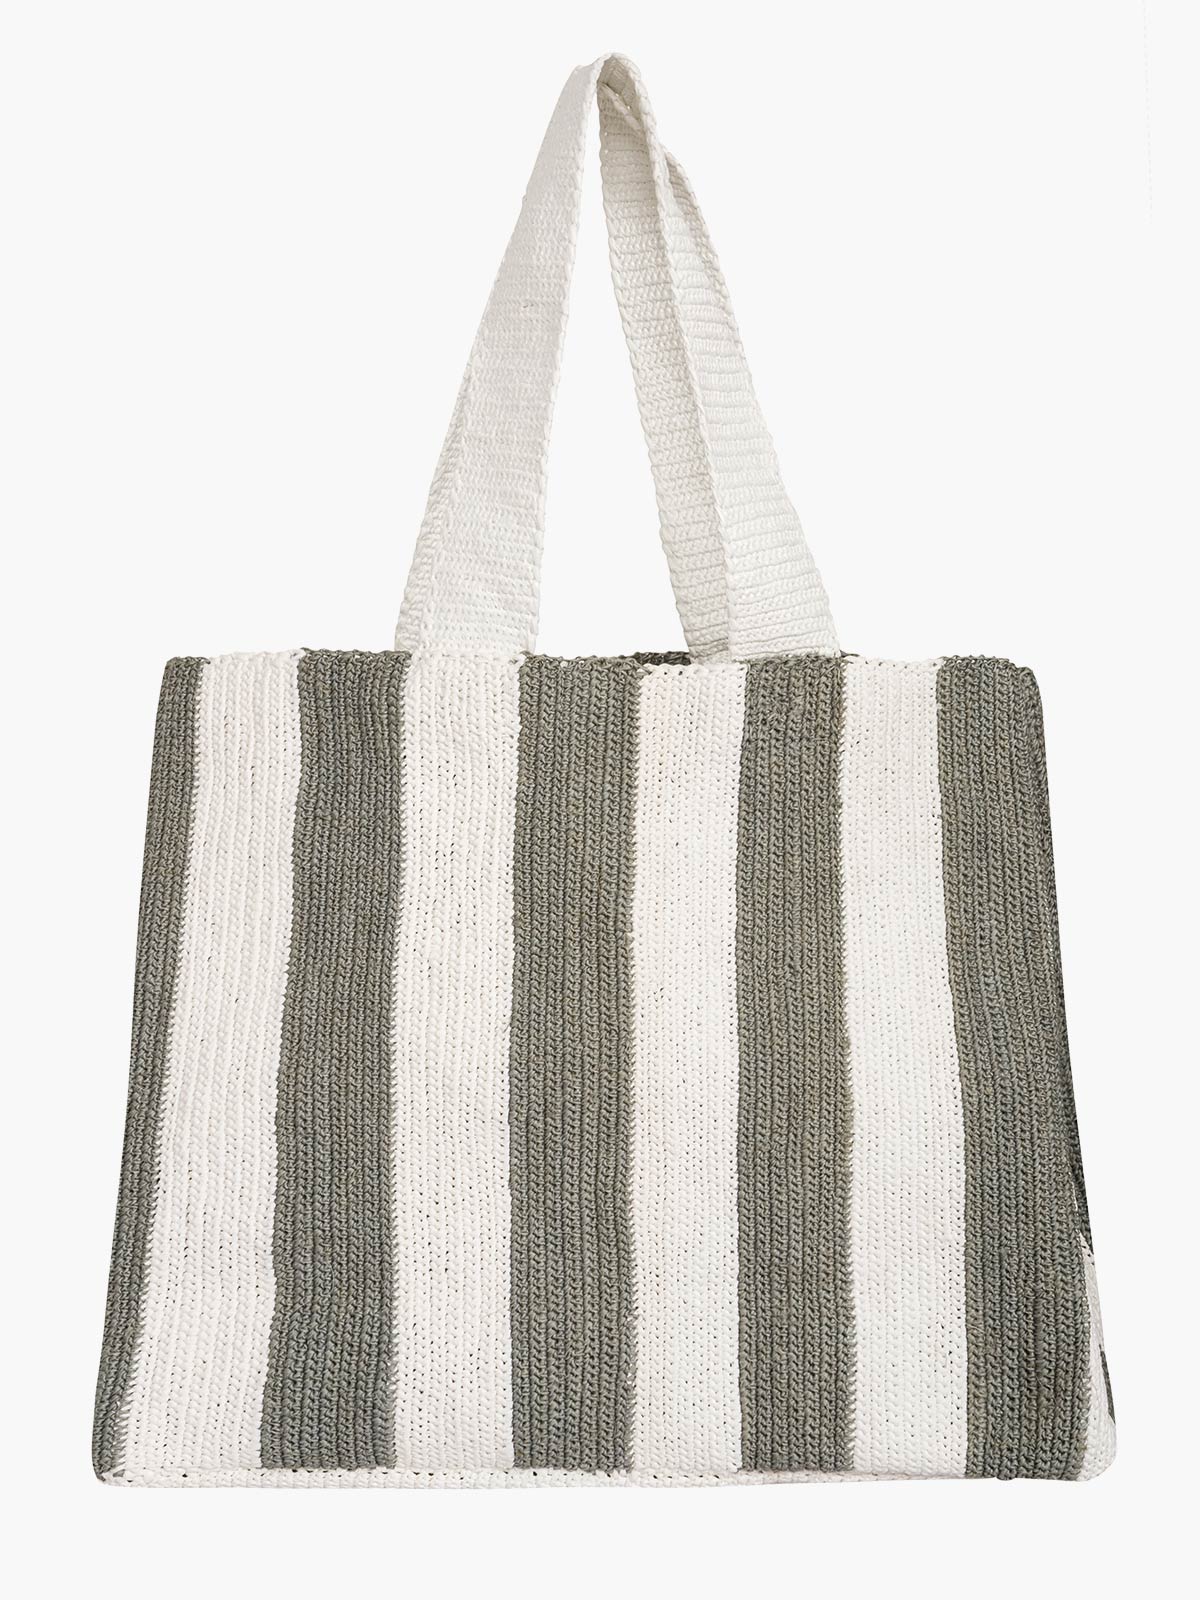 Recycled Plastic Beach Bag | Gray/White Recycled Plastic Beach Bag | Gray/White